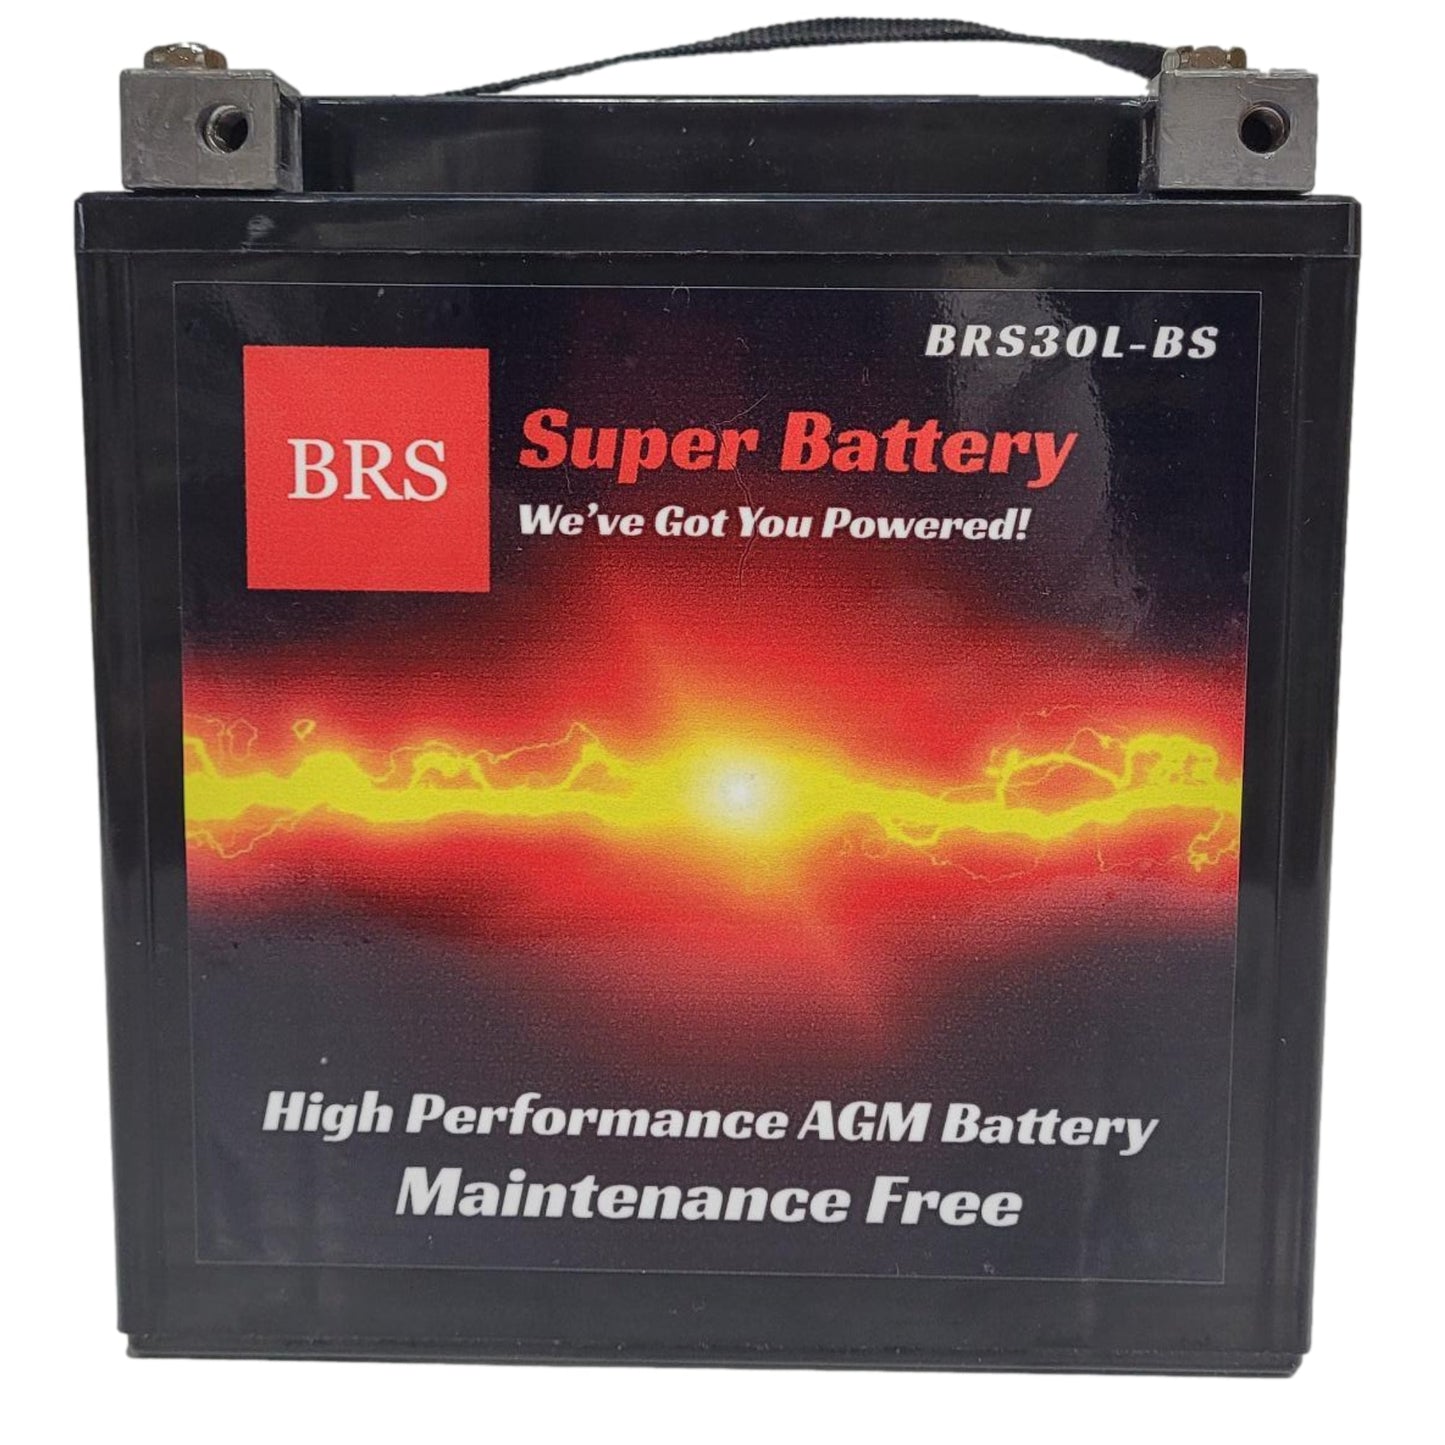 BRS30L-BS 30 Day Warranty Battery & Smart Charger / Maintainer Combo Bundle Kit - BRS Super Battery